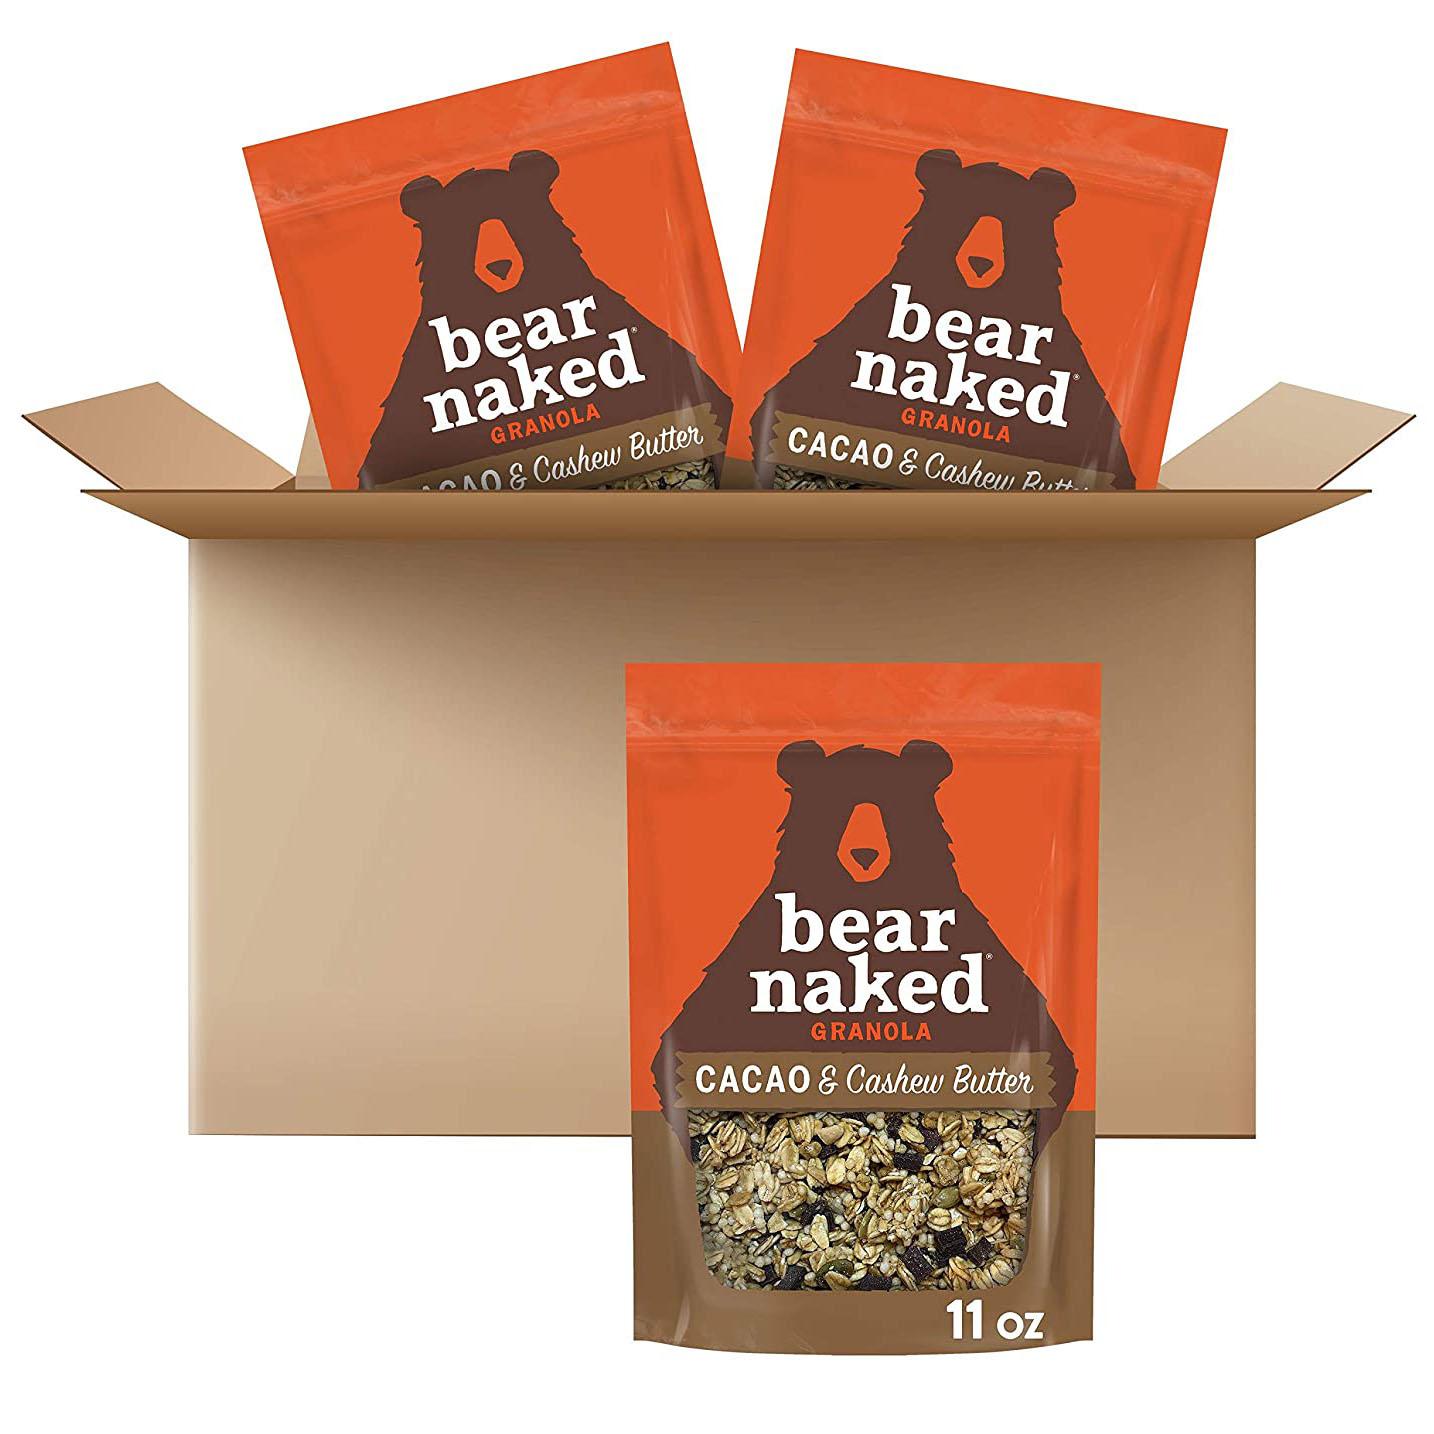 3 Bear Naked Granola Cacao and Cashew Butter for $7.60 Shipped